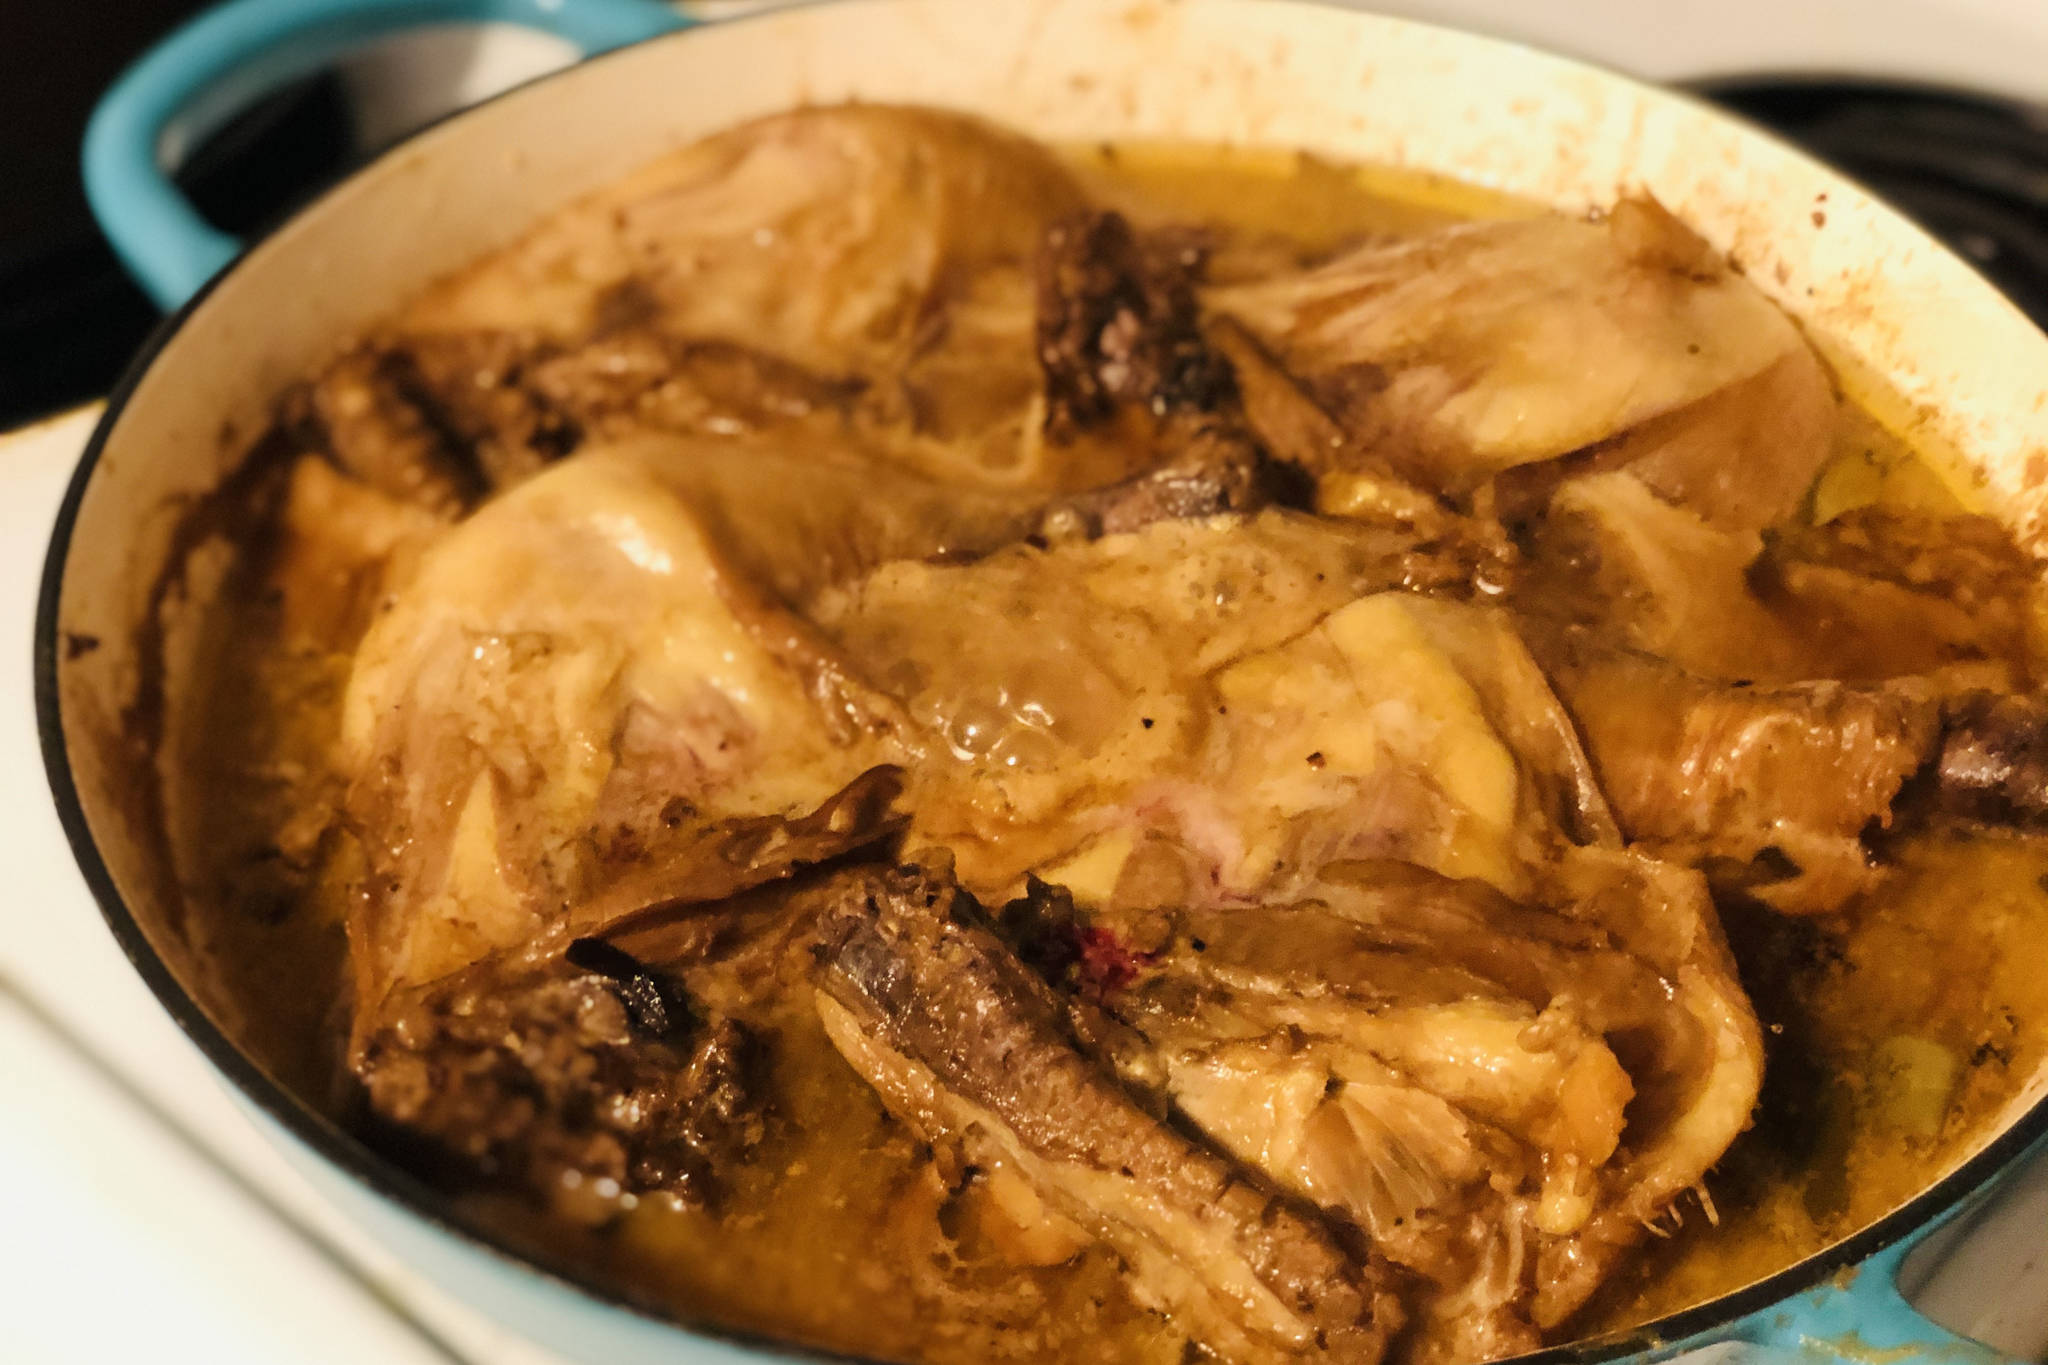 Chicken adobo simmering on the stove, on Monday, March 1, 2021, in Anchorage, Alaska. (Photo by Victoria Petersen/Peninsula Clarion)